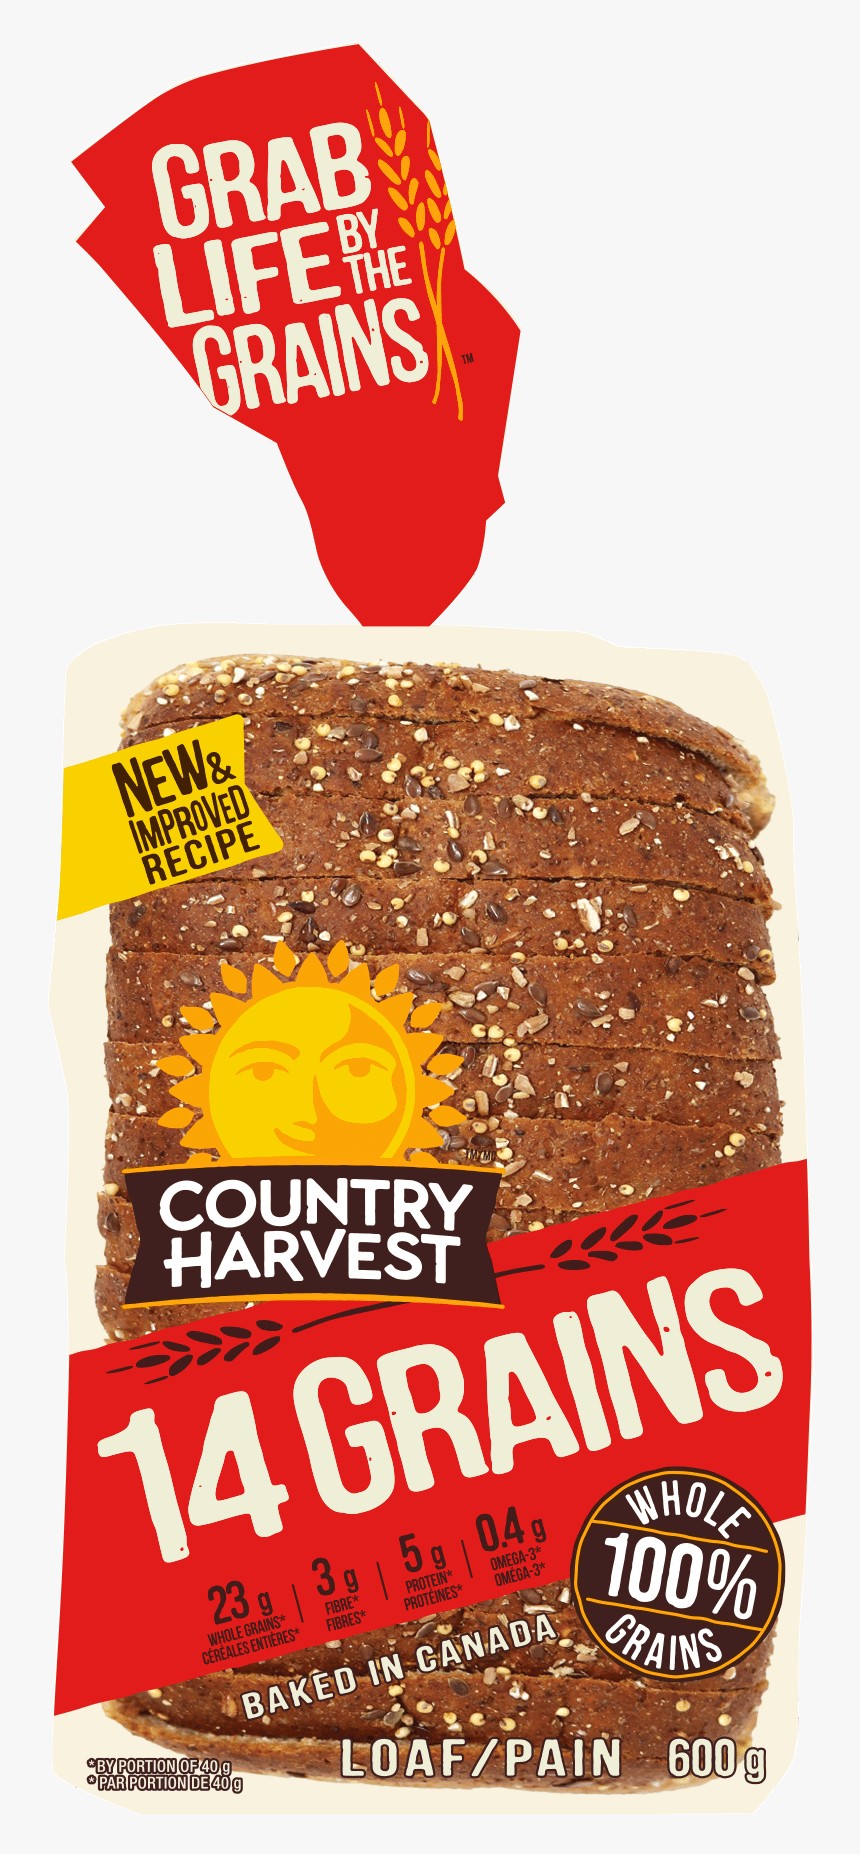 Country Harvest 14 Grains Bread Image - Country Harvest 14 Grain Bread, HD Png Download, Free Download